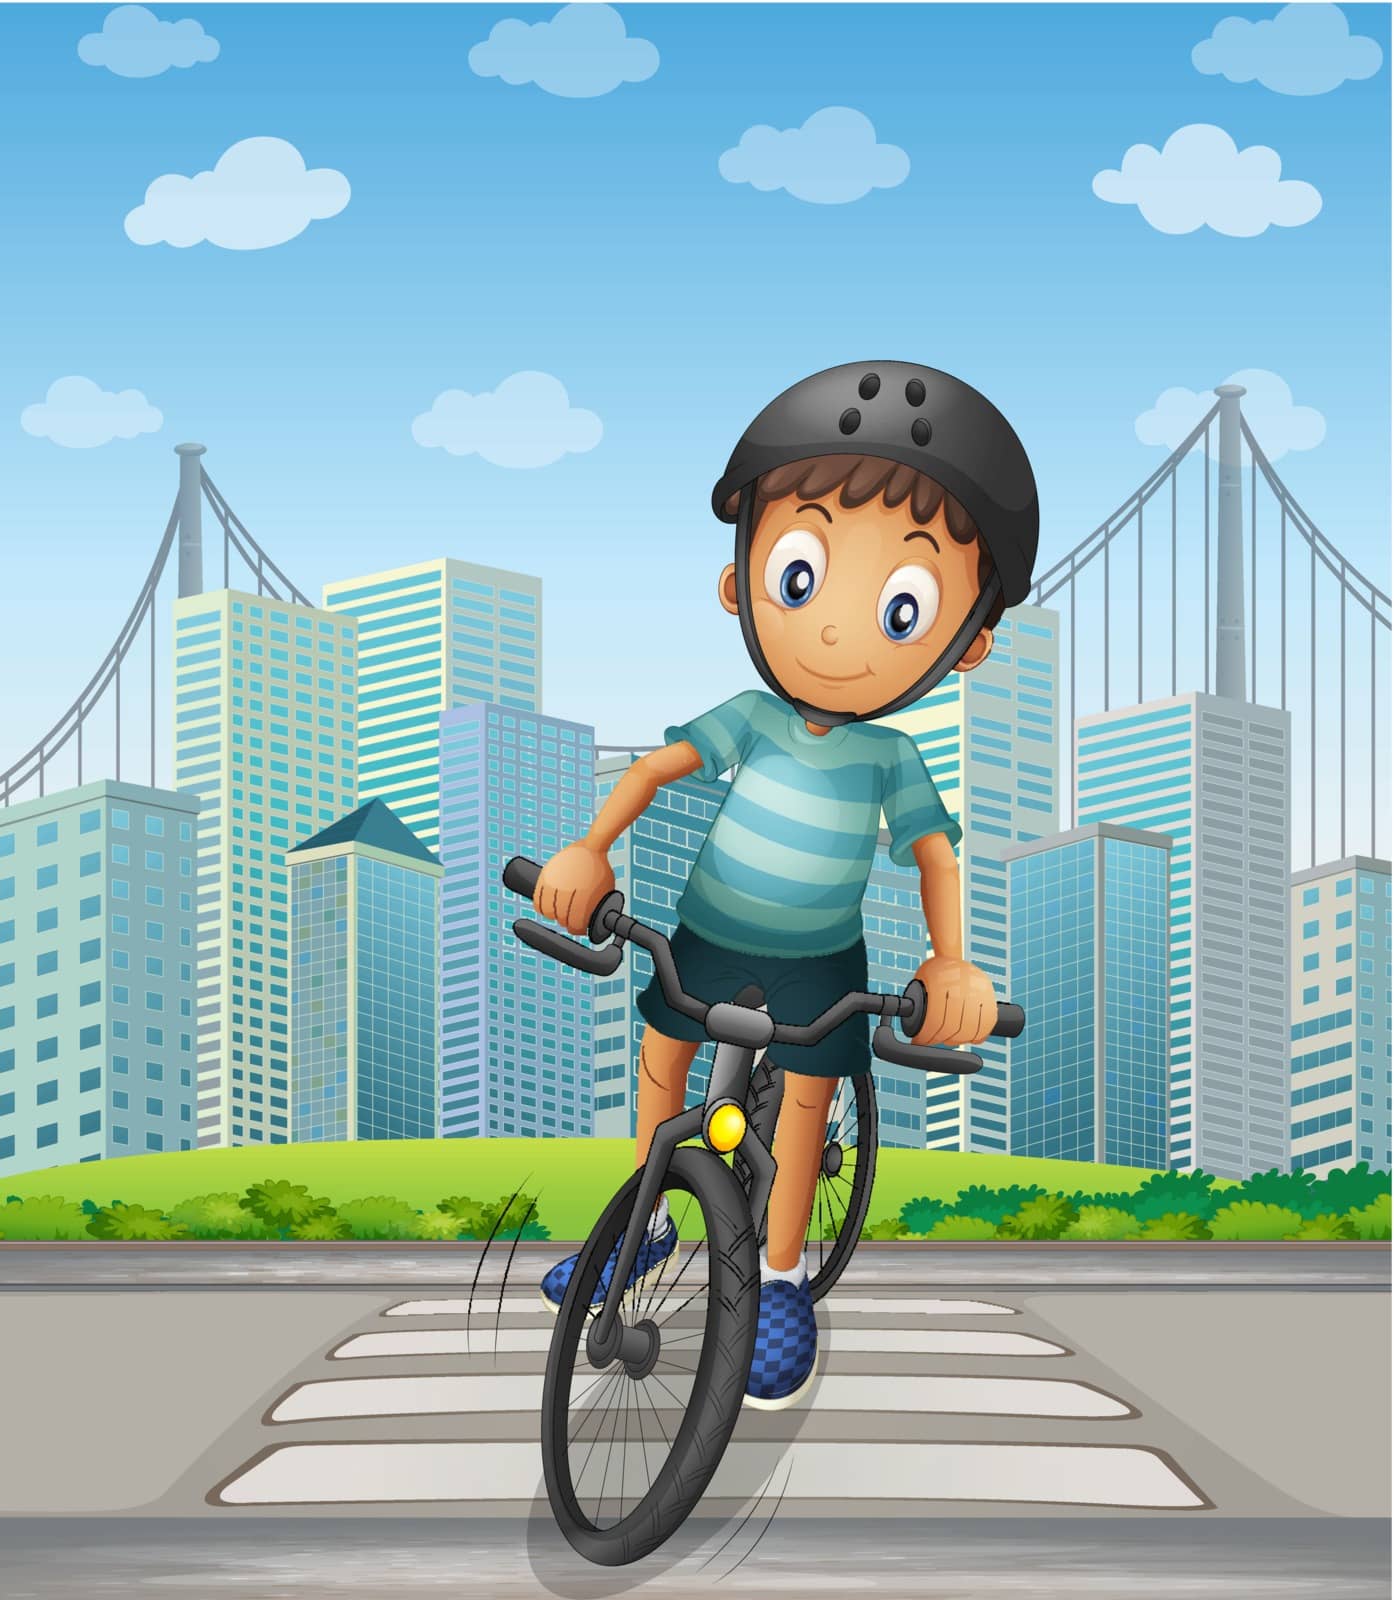 A boy biking in the city by iimages